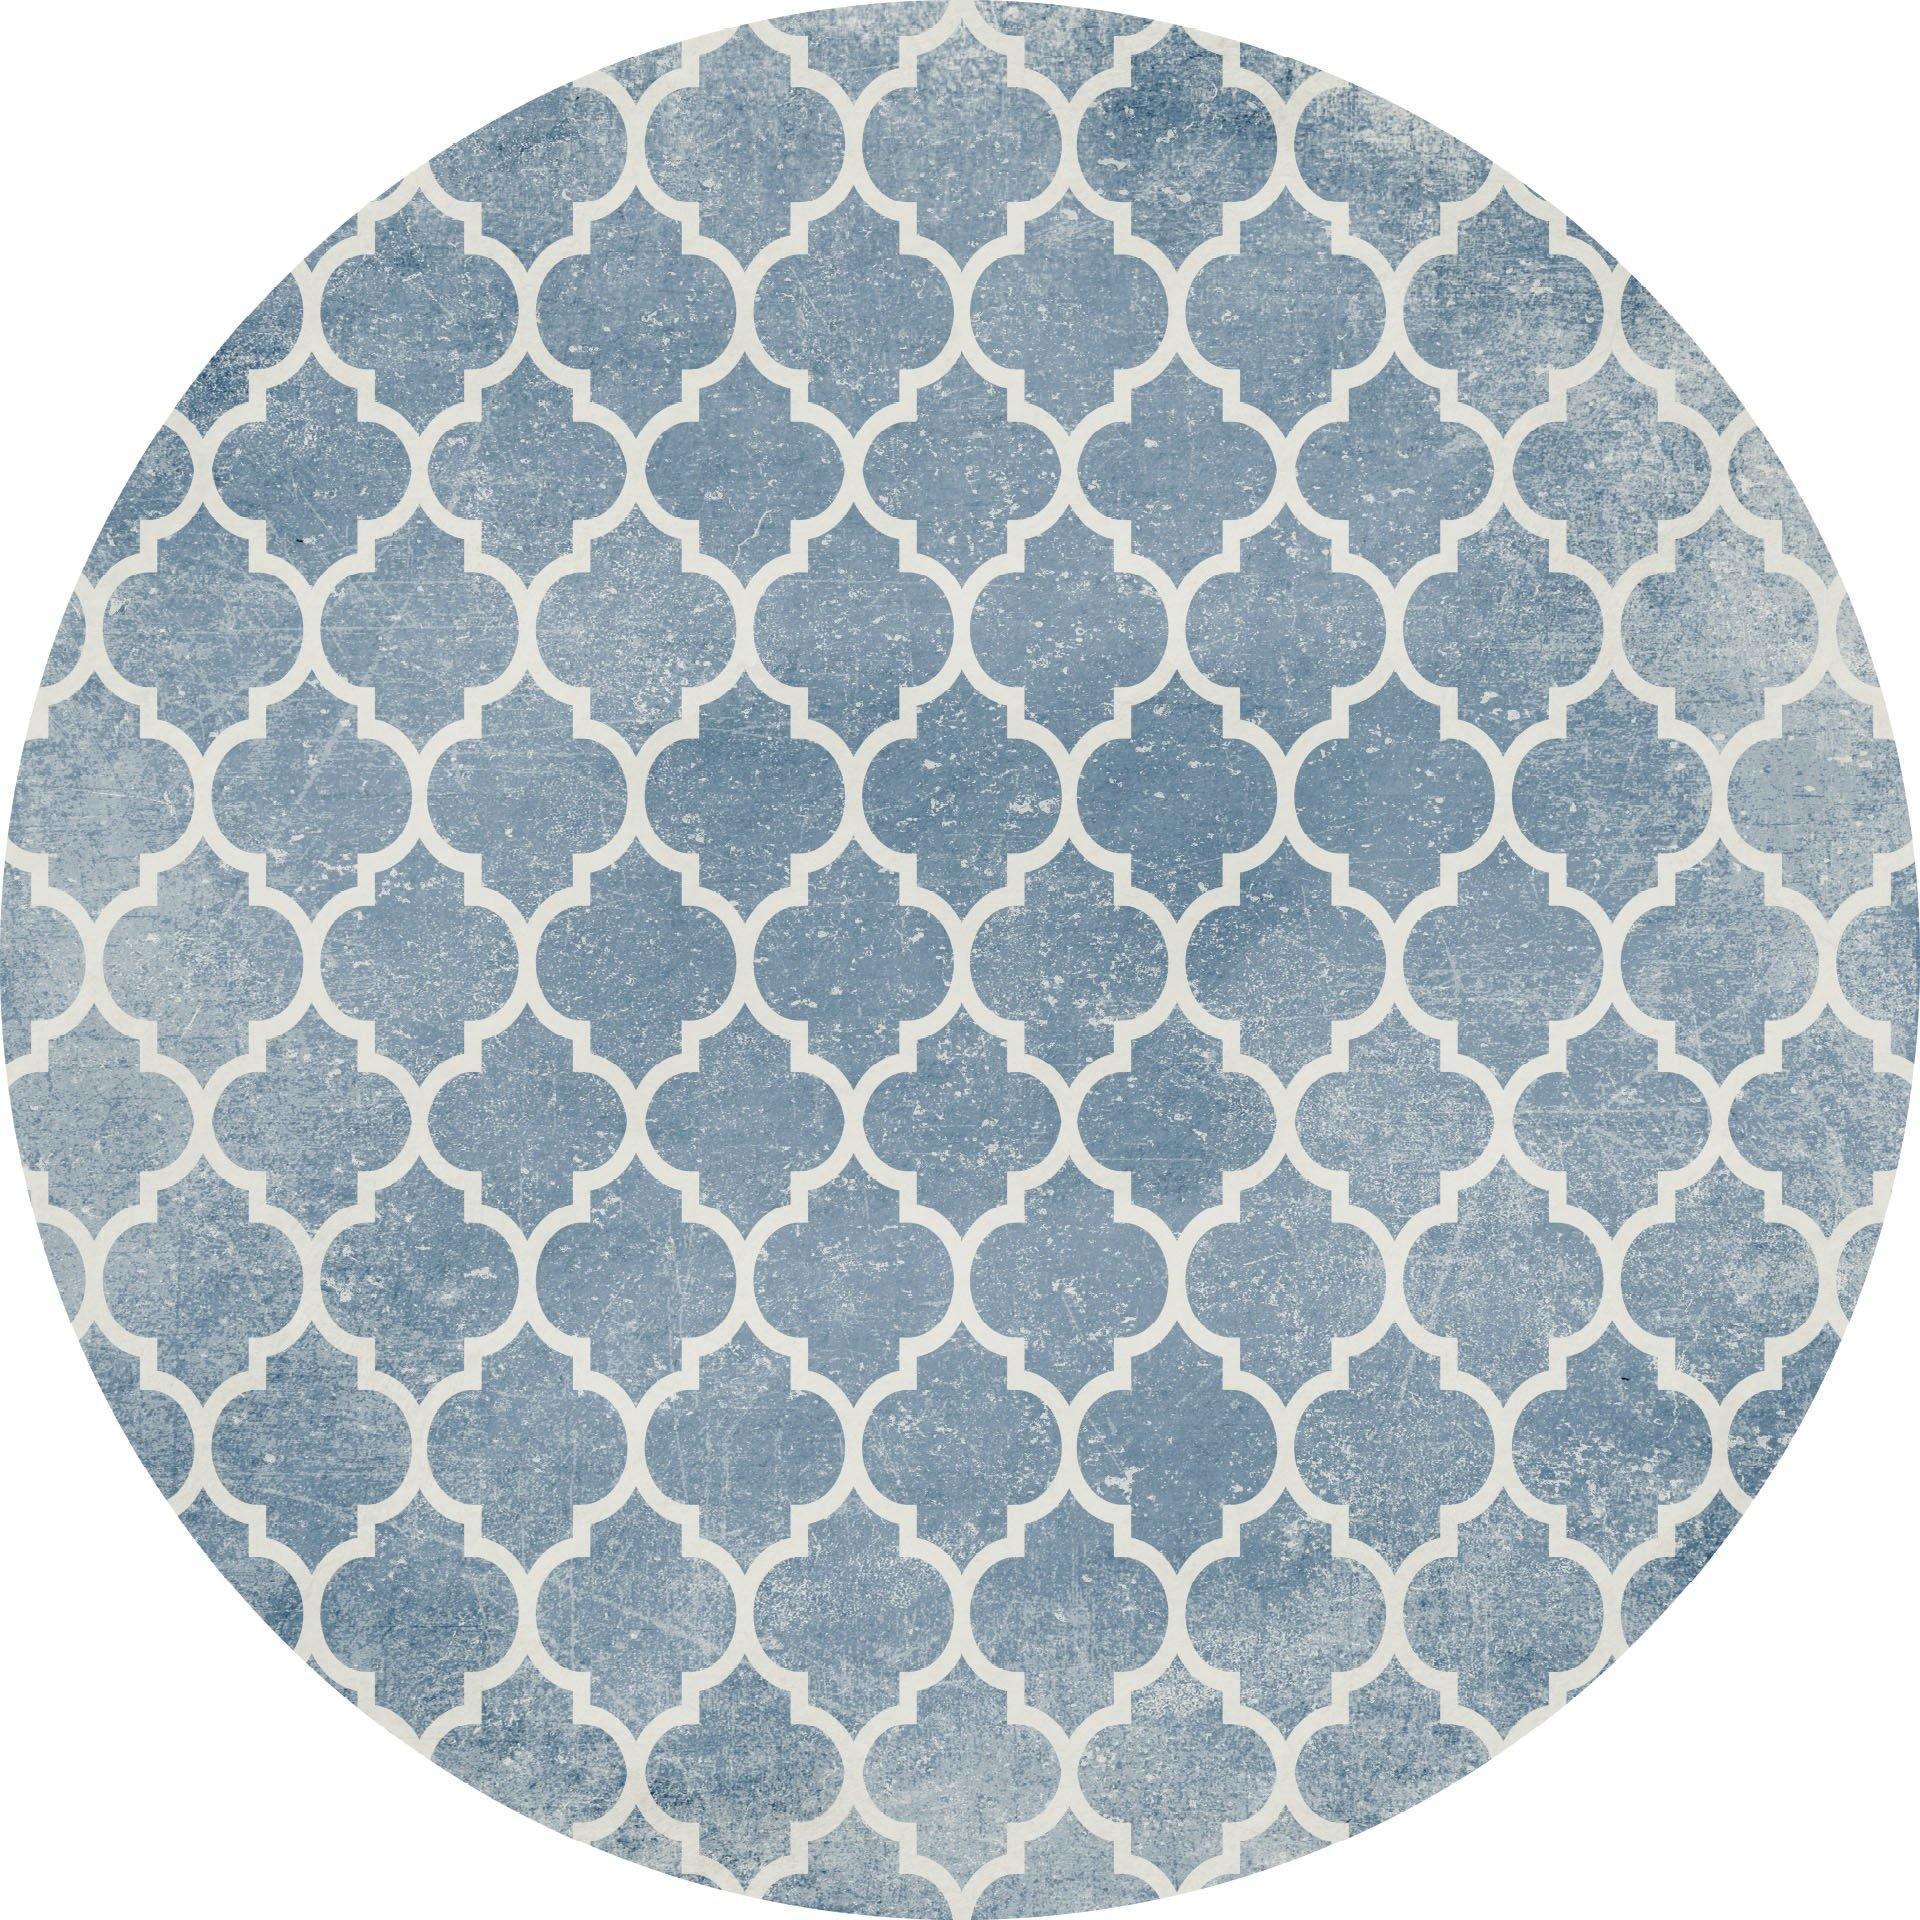 Ava Blue 15" Round Placemat Set of 4 *Final Sale* PERFECT - Carolina Creekhouse Easy to Clean Premium Vinyl Mats